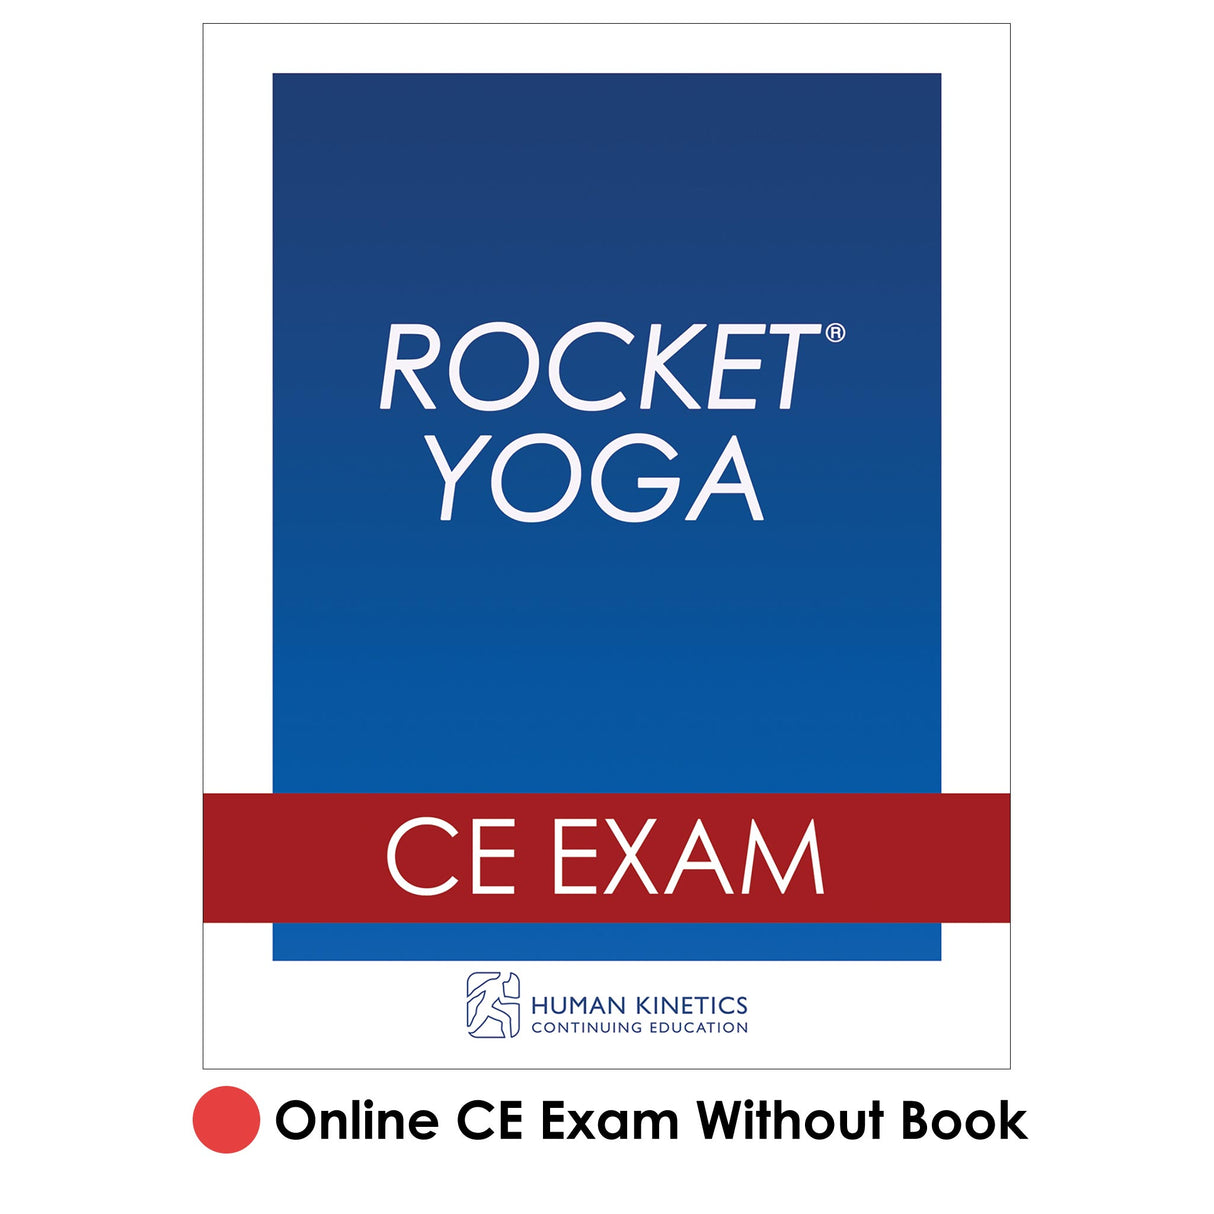 Rocket® Yoga Online CE Exam Without Book